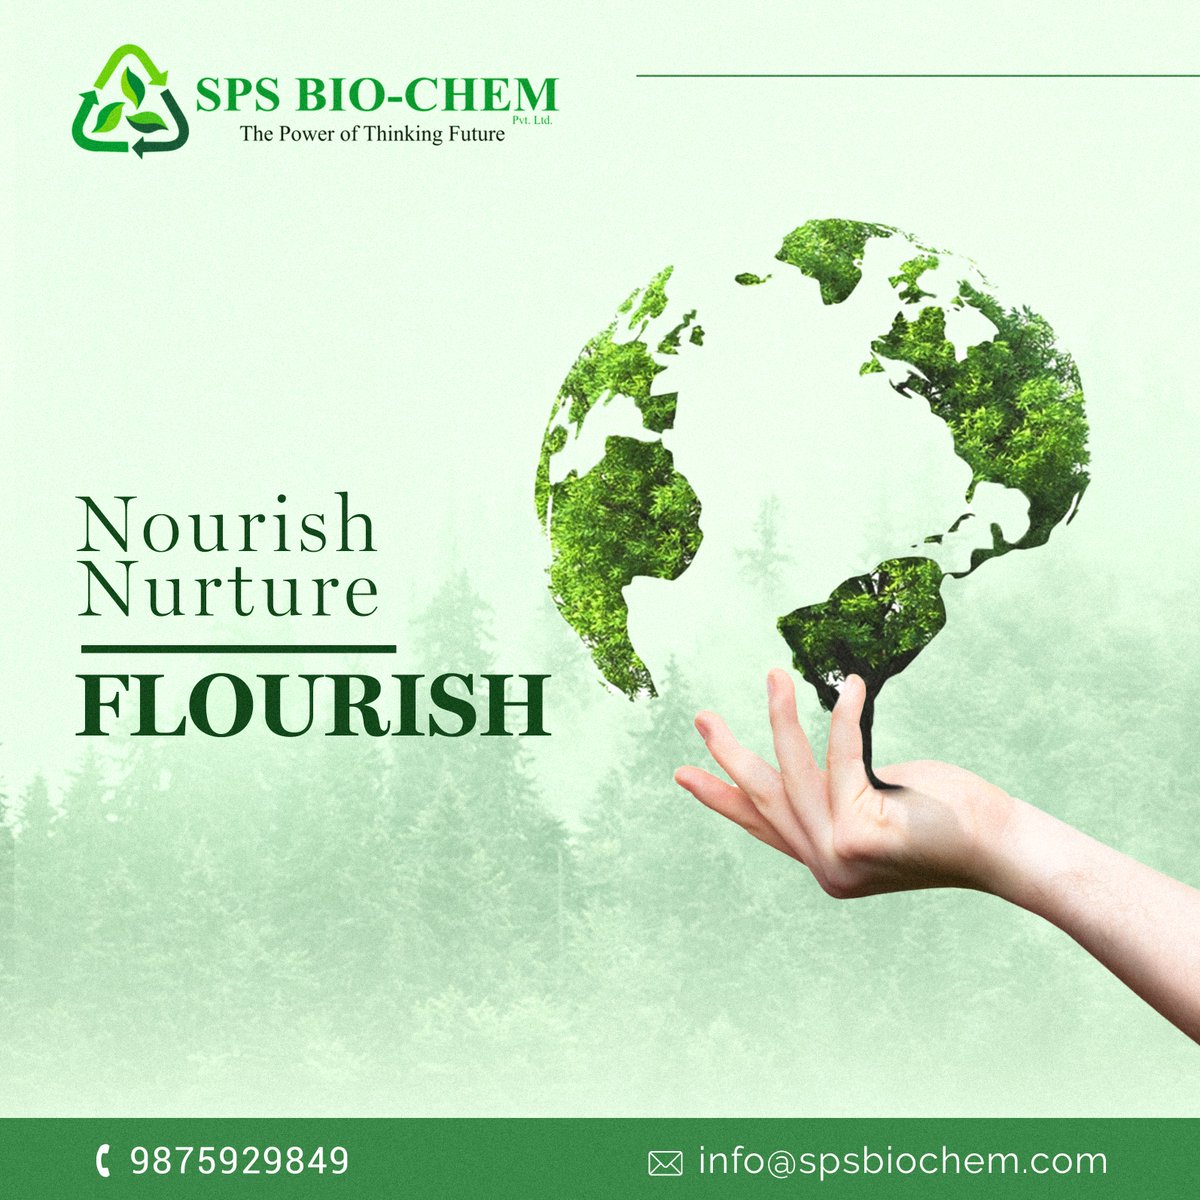 SPS Bio Chem envisions a world where our planet thrives through nurturing and nourishment. 

#compressedbiogas #whyinnews #biogas #cbg #hydrocarbongases #methanegaseous #plantwaste #chemically #cng #biomas #cylinders #pipelines #retailoutlets #futureofcbg